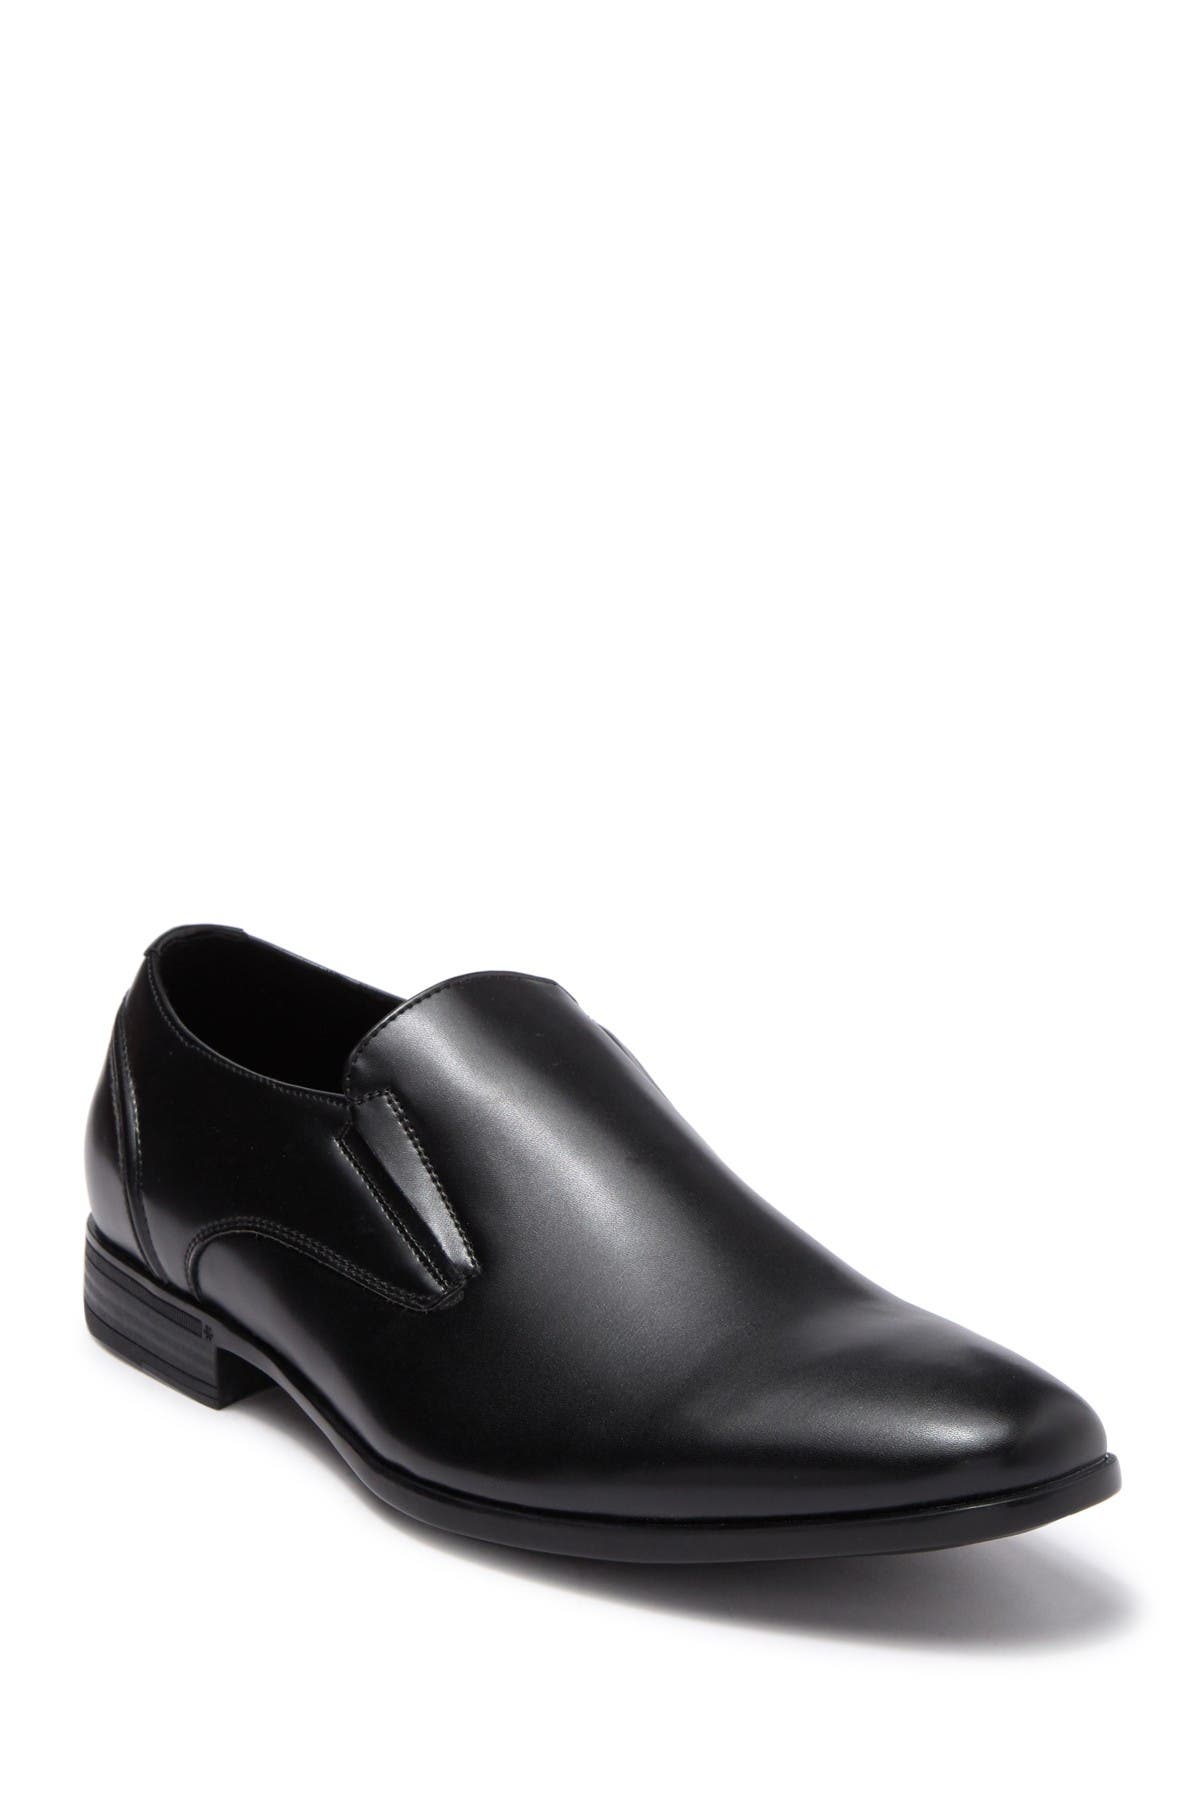 kenneth cole slip on loafers